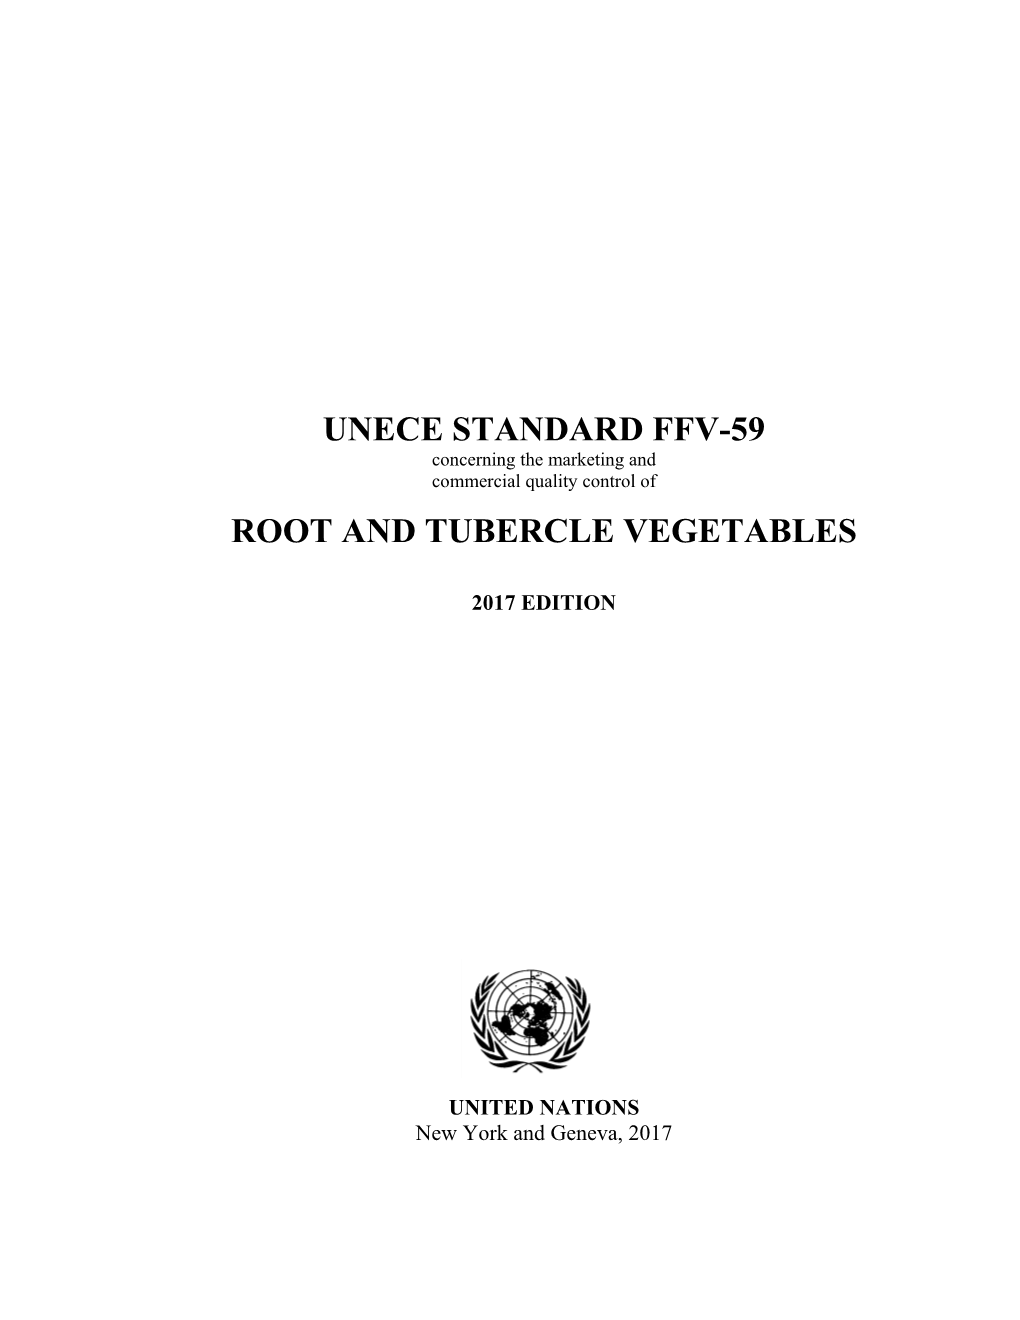 Unece Standard Ffv-59 Root and Tubercle Vegetables